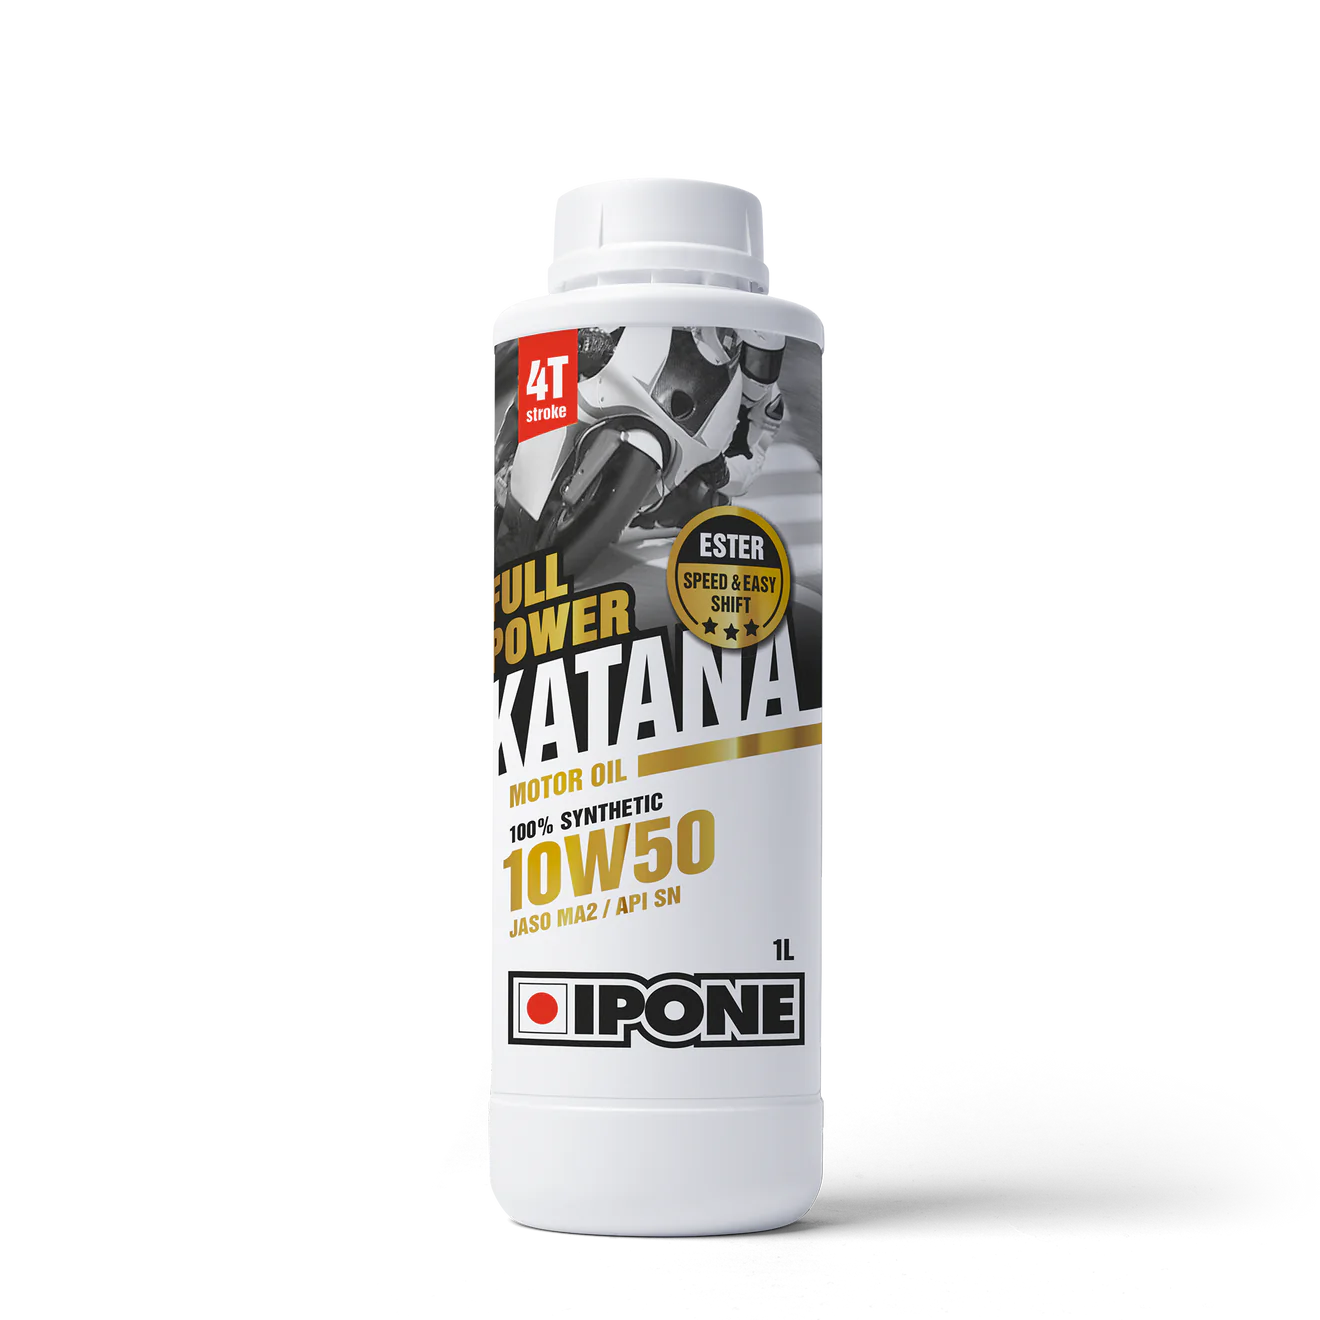 IPONE-1_FP_KATANA_10W50_Best-off-road-motorcycle-oil_Best-oil-for-enduro-motorcycles_Best-synthetic-oil-for-motocross_Synthetic-ester-based-off-road-oil_Best-oil-for-off-road-engine-durability_Off-road-oil-for-reduced-friction_dubai